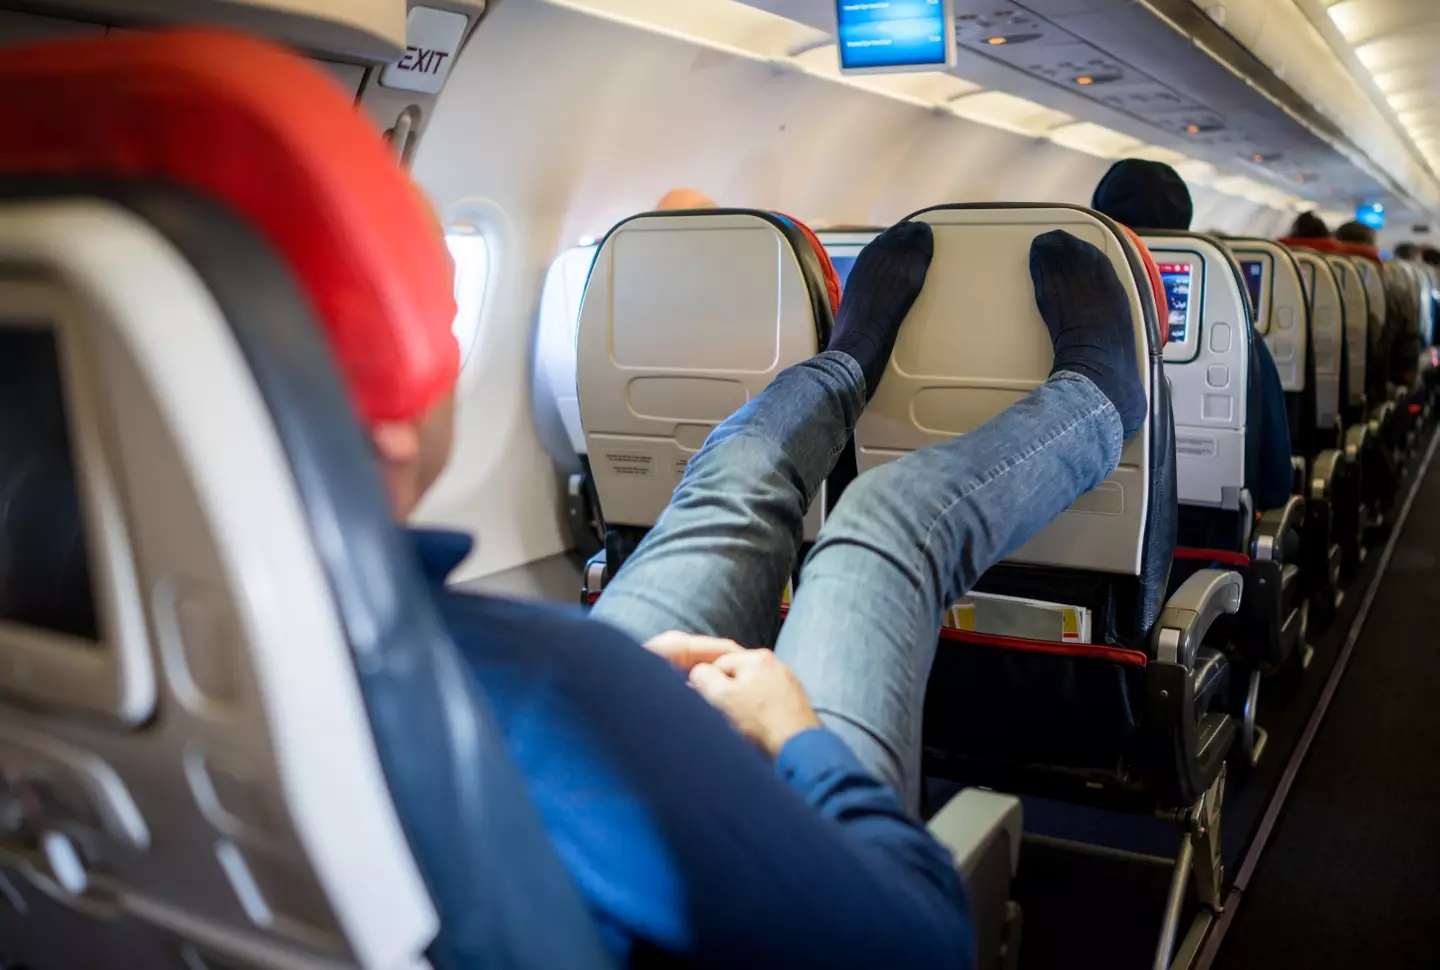 Plane etiquette is a hot topic, and this latest saga a woman has been praised for not giving in.